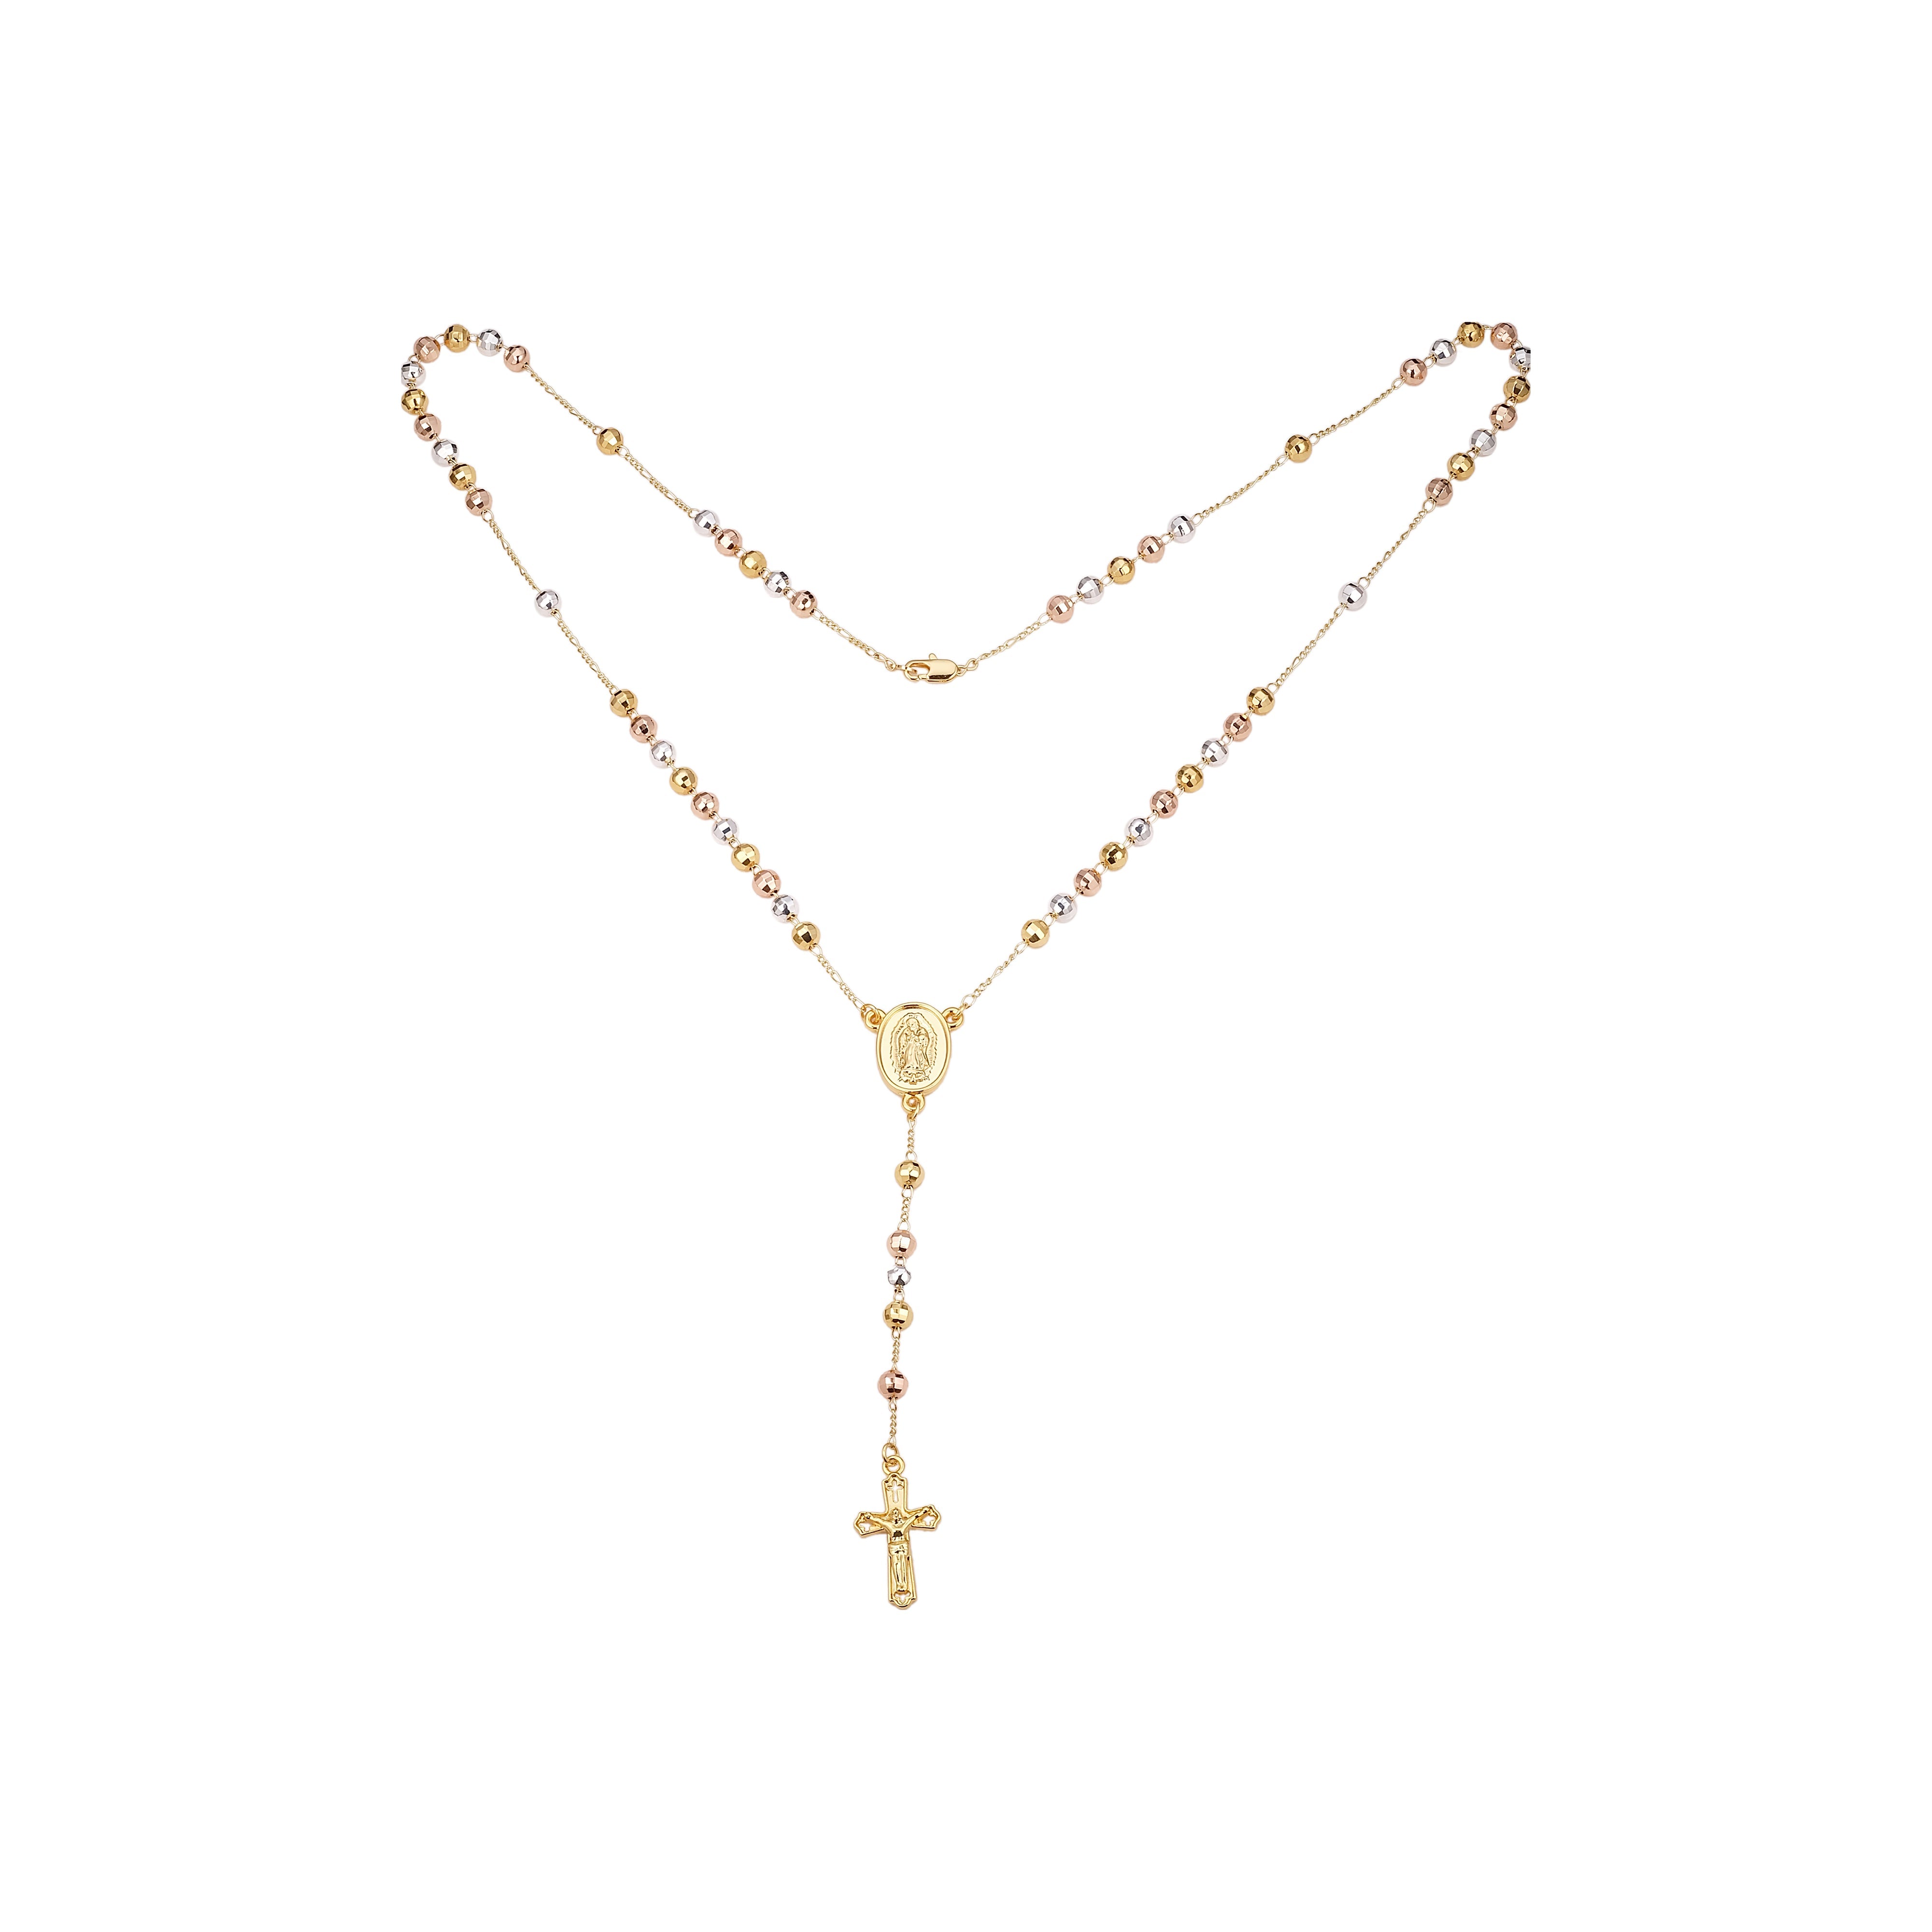 Italian Virgin of Guadalupe Catholic beads Rosary Necklace plated in White Gold, 14K Gold, 14K Gold two tone